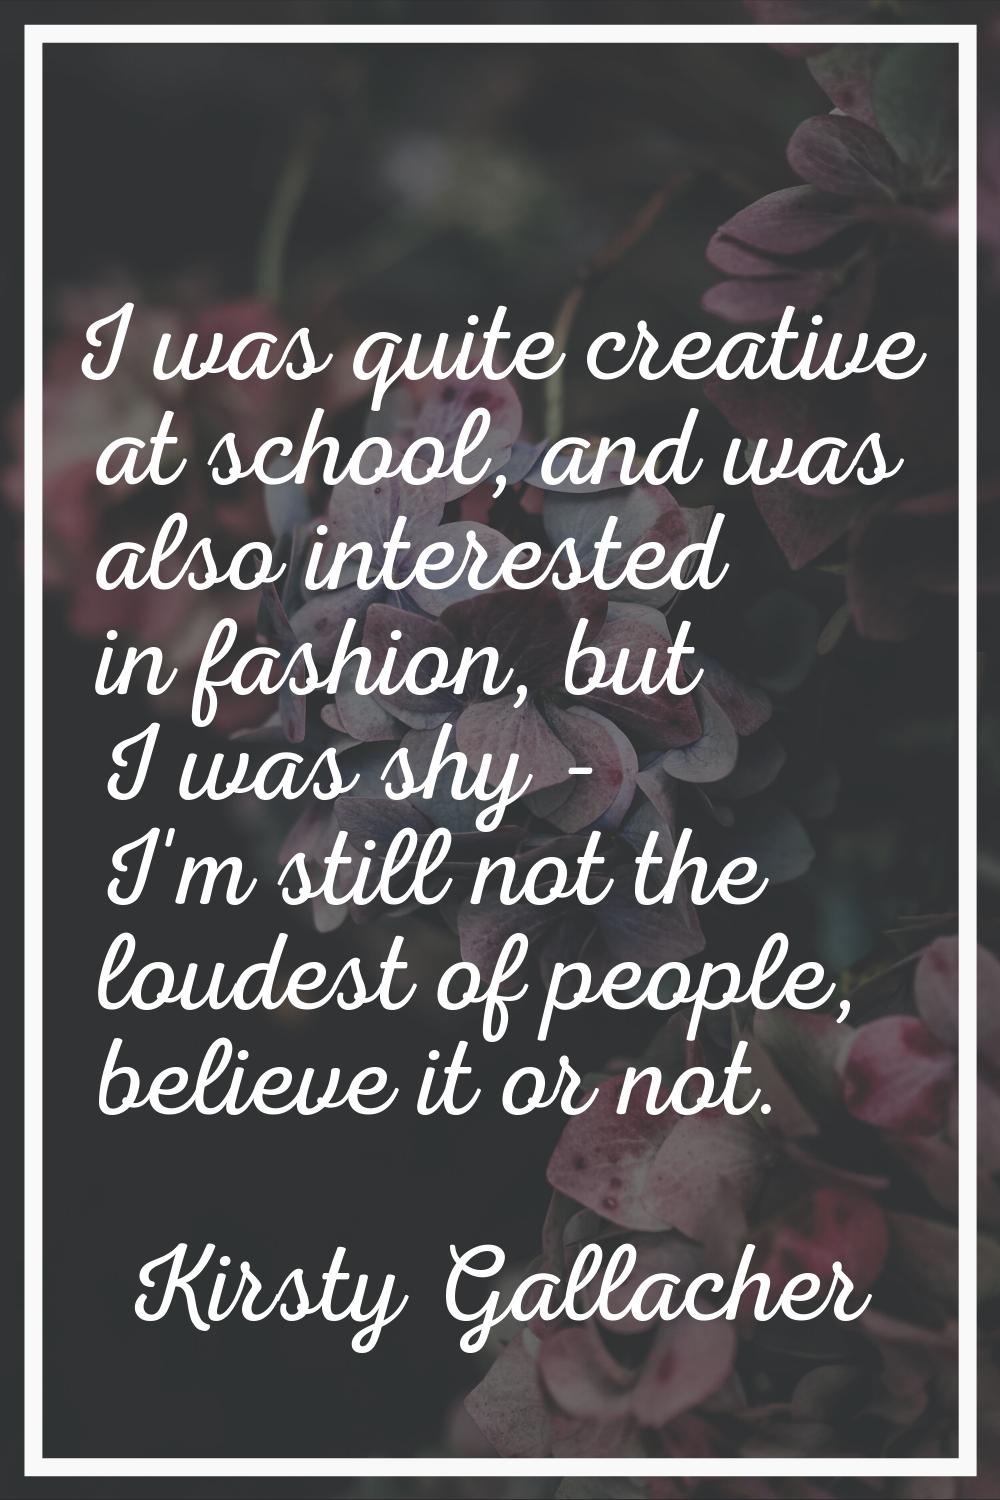 I was quite creative at school, and was also interested in fashion, but I was shy - I'm still not t